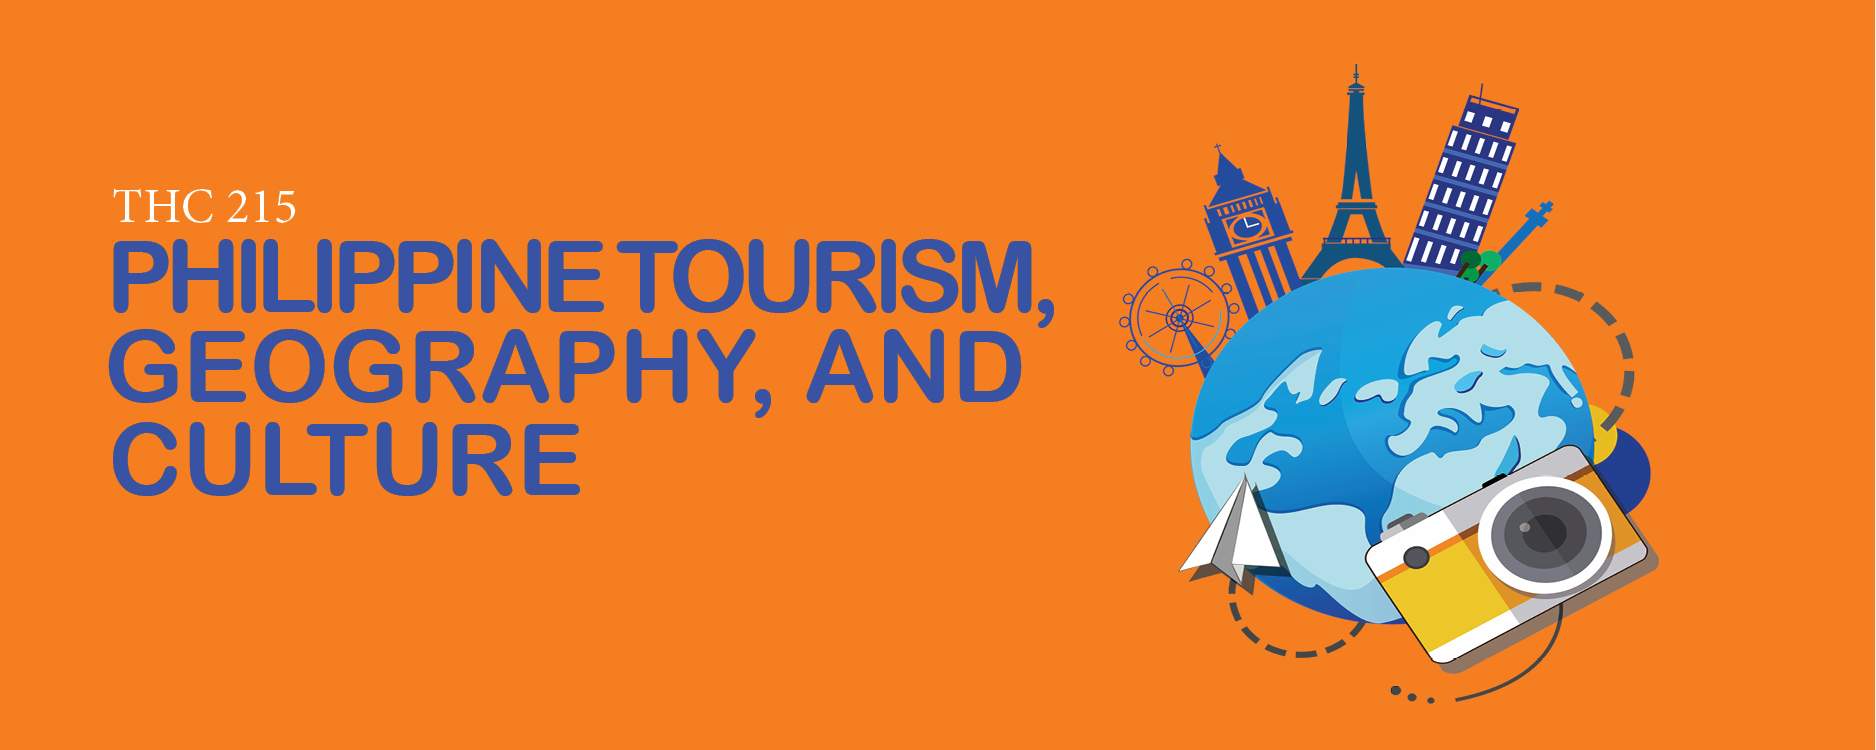 Philippine Tourism, Geography and Culture